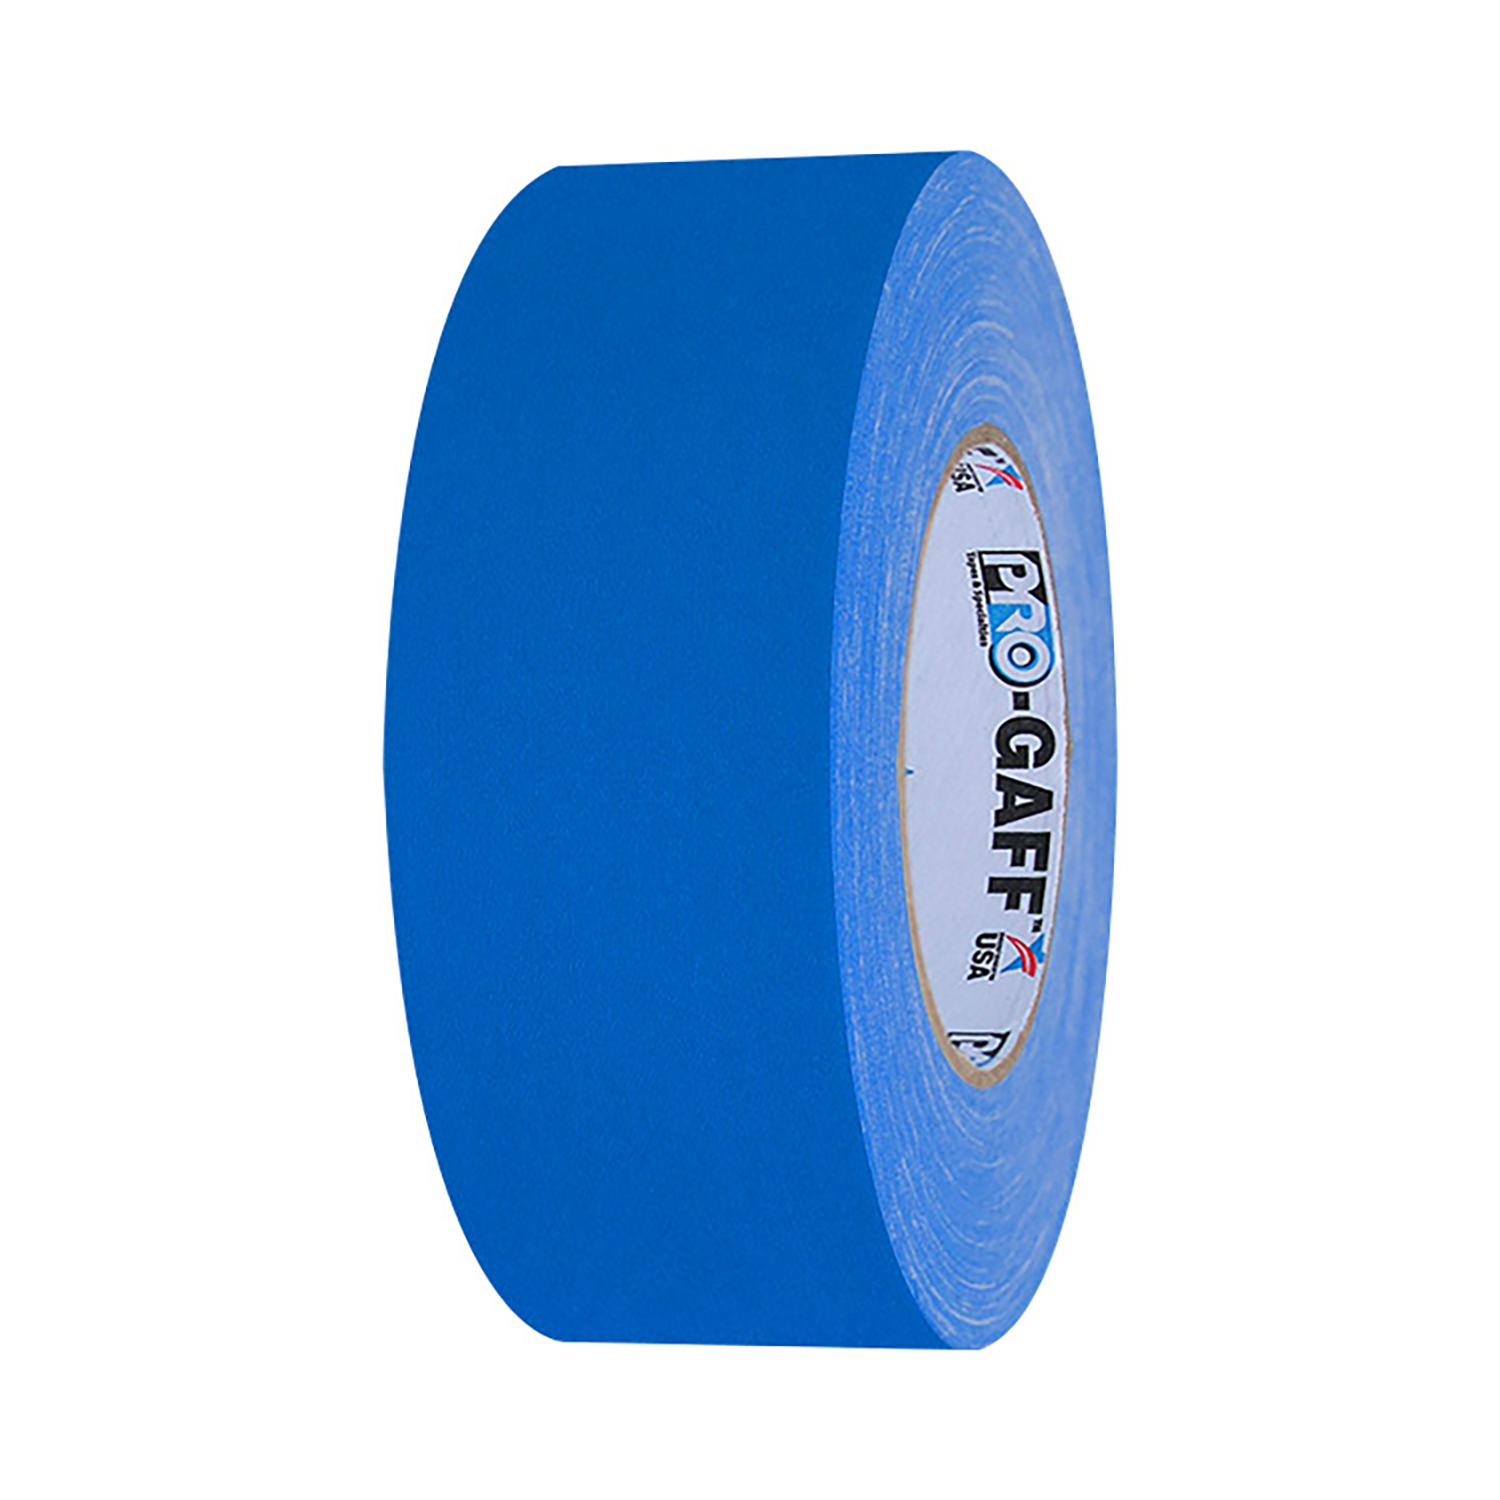 Pro Gaff Tape Cloth - Electric Blue - 55 Yards - 2"